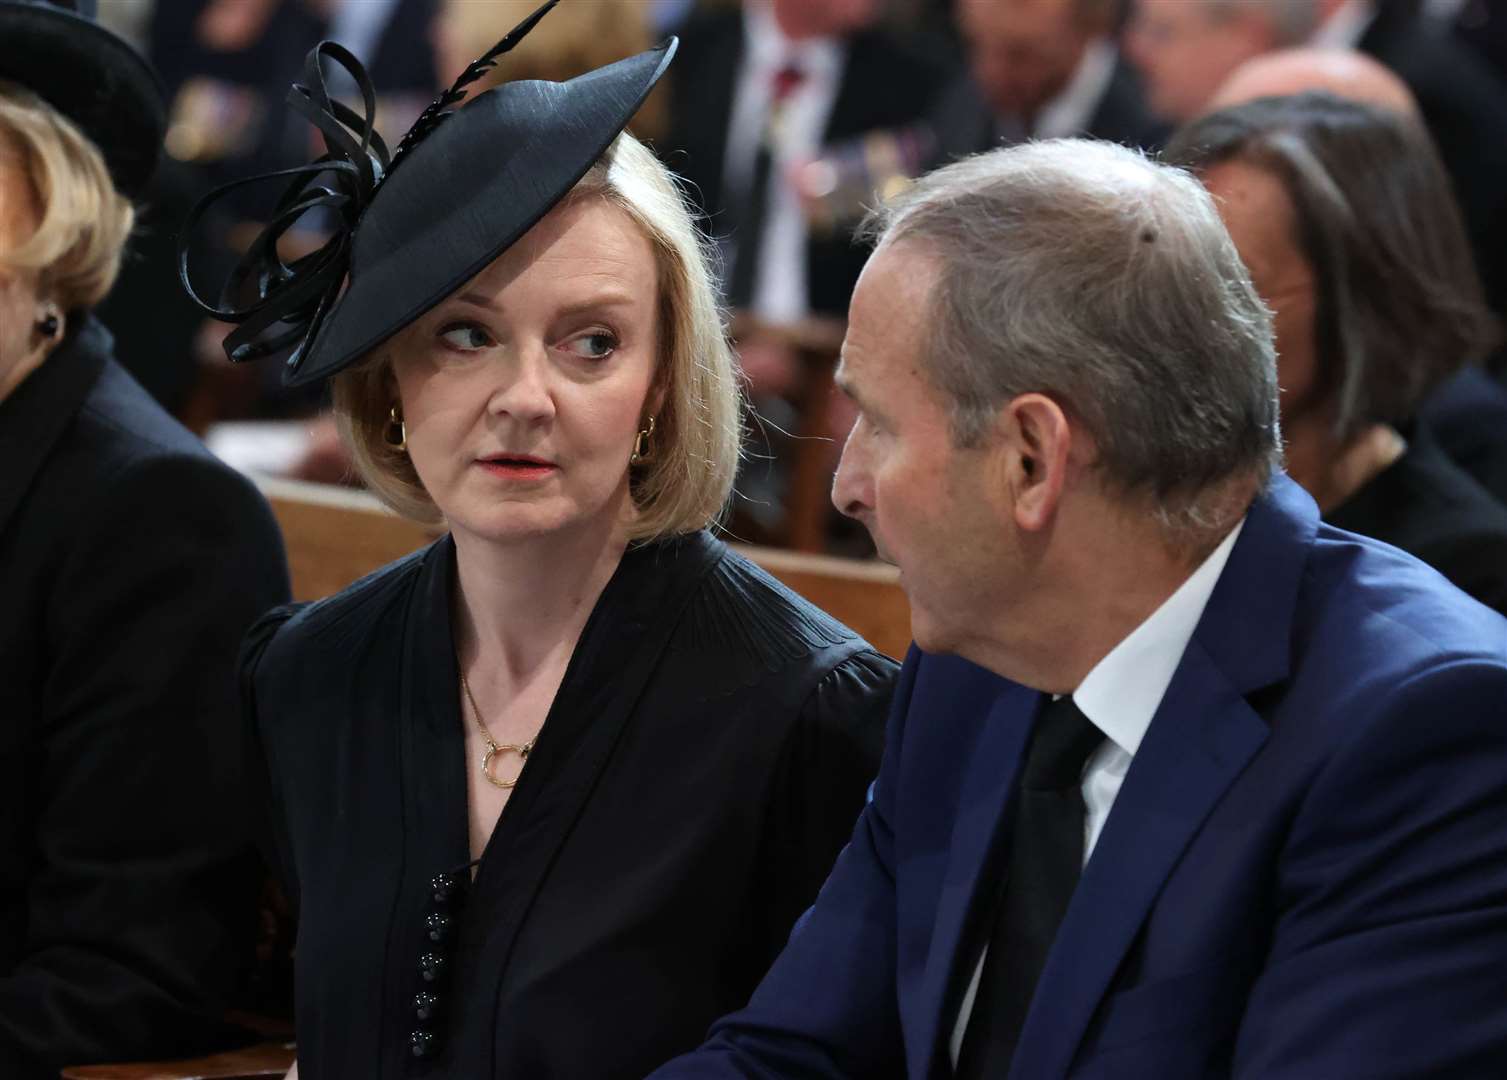 There have been suggestions Ms Truss will speak with Irish premier Micheal Martin on the margins of the Queen’s funeral, amid tensions over the Northern Ireland Protocol (PA)